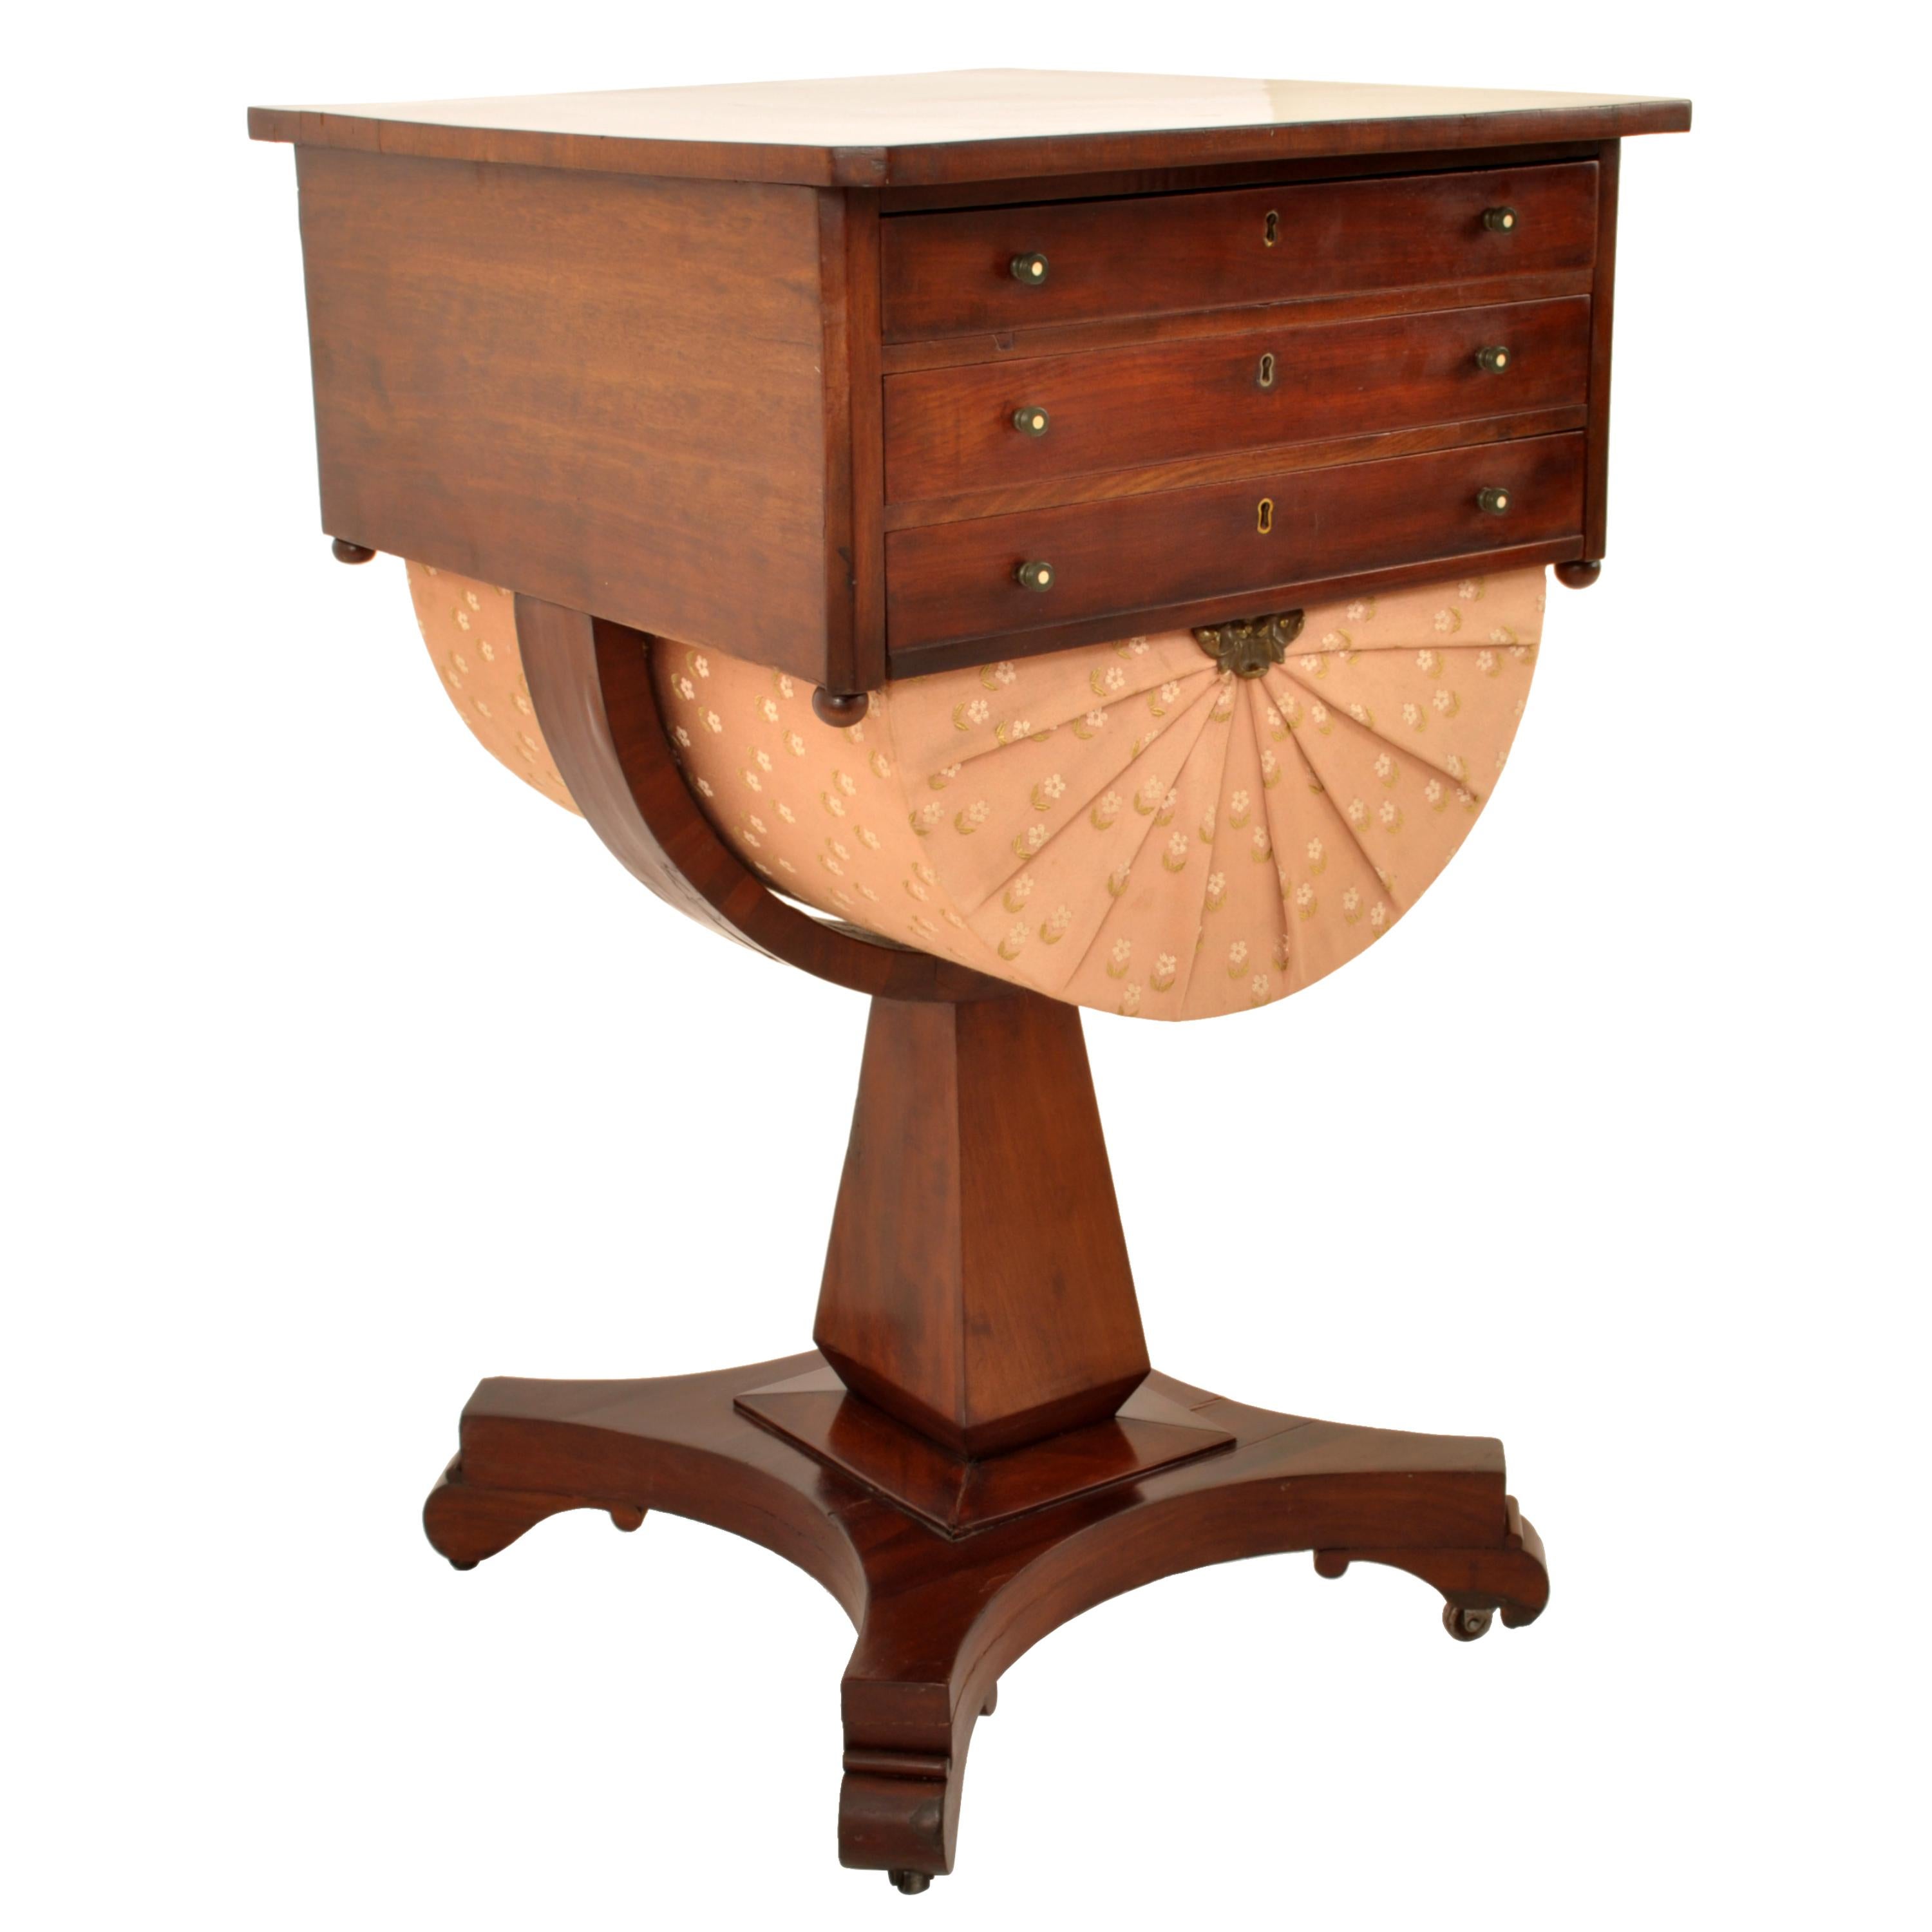 A good antique American Empire period flame mahogany work table, New York, circa 1840.
The table made from flame mahogany and having three drawers, the top with a fitted interior, the third drawer with a pleated satin fabric embroidery 'basket'